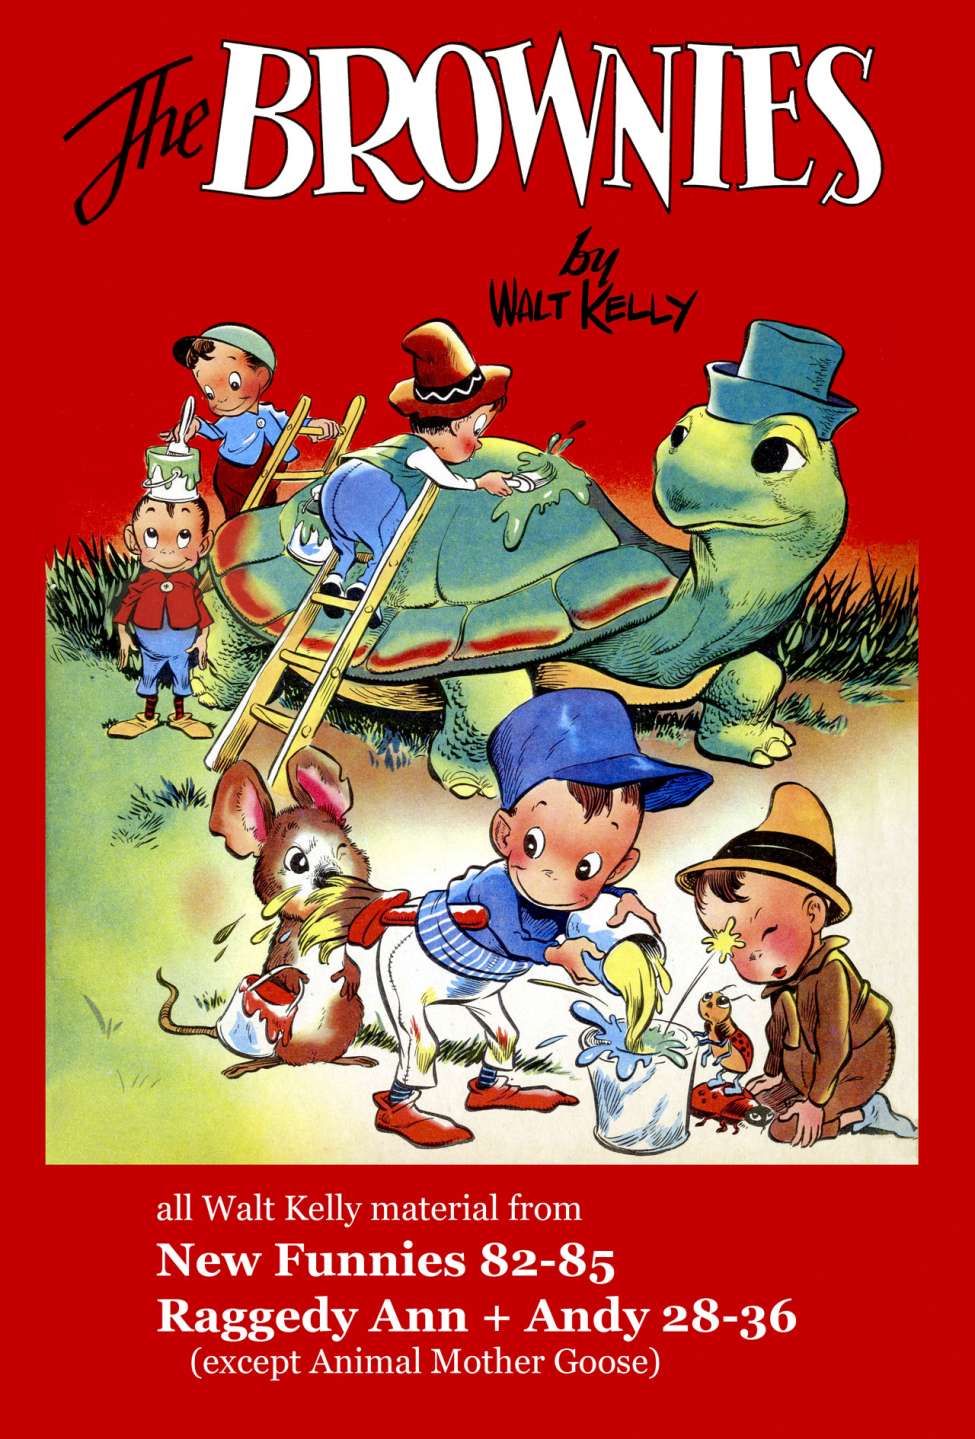 Book Cover For Walt Kelly's The Brownies Collection